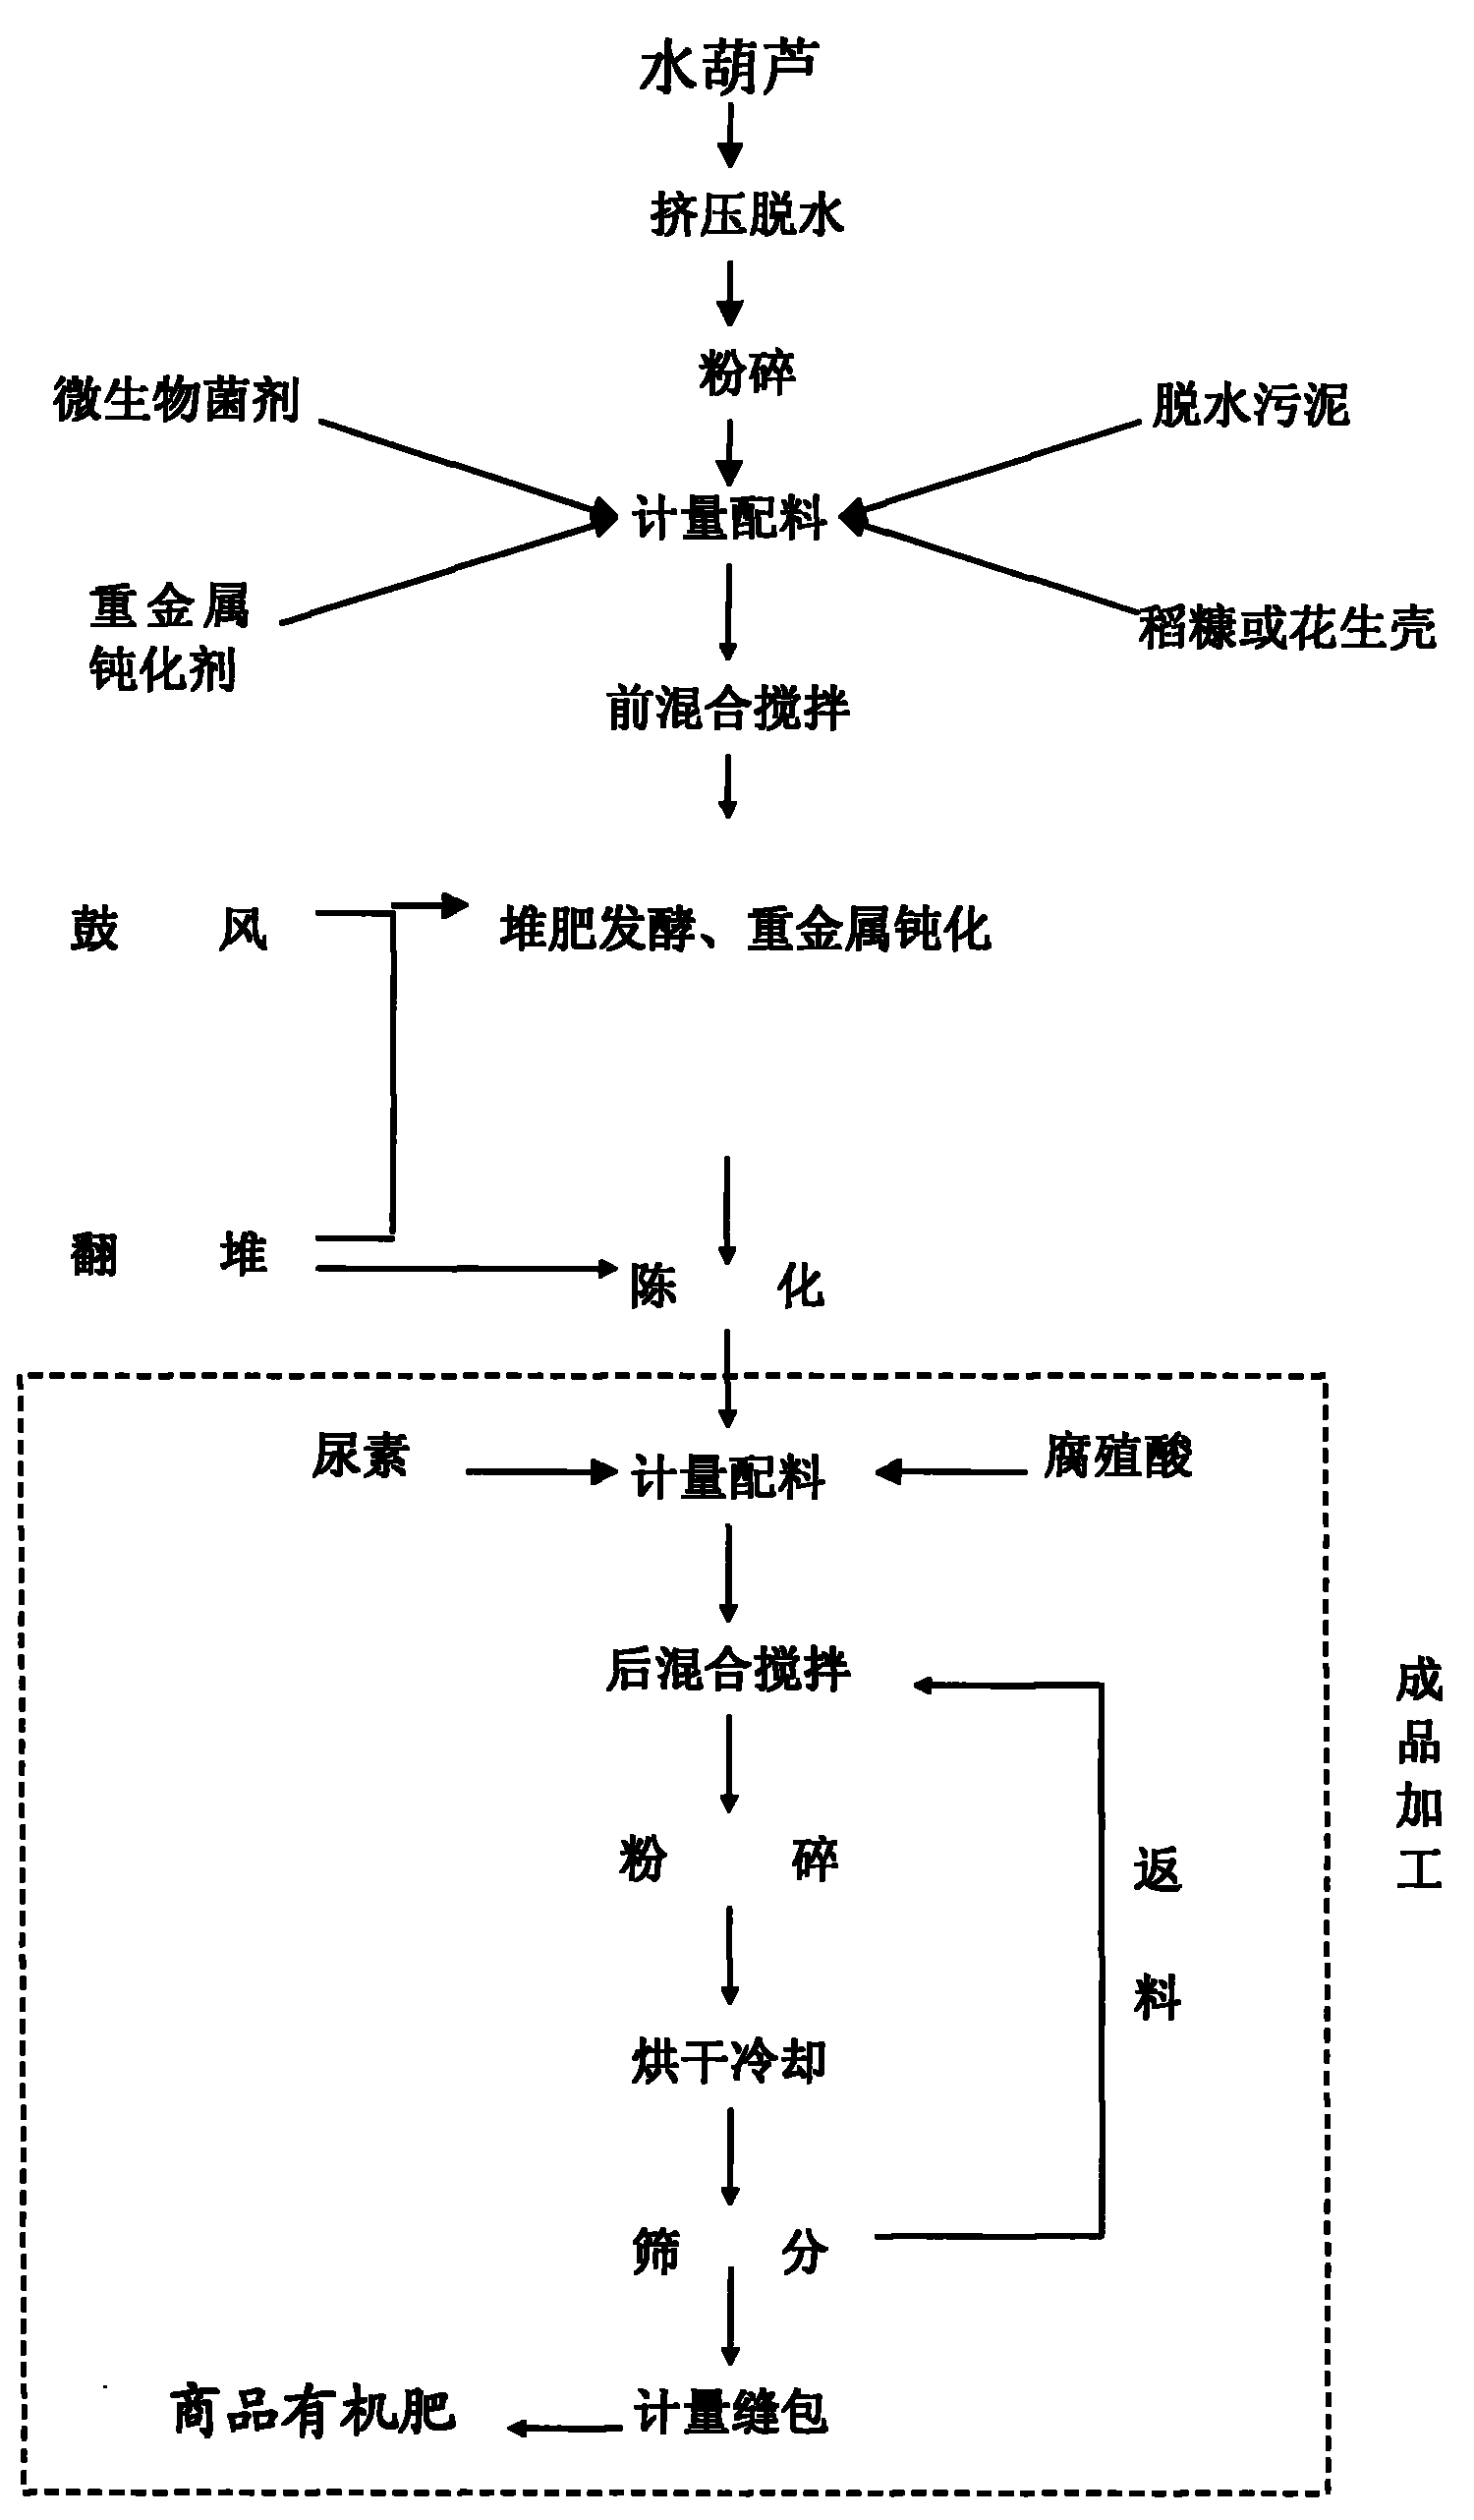 Method for preparing organic fertilizer by mixed fermentation of water hyacinth and dewatered sludge